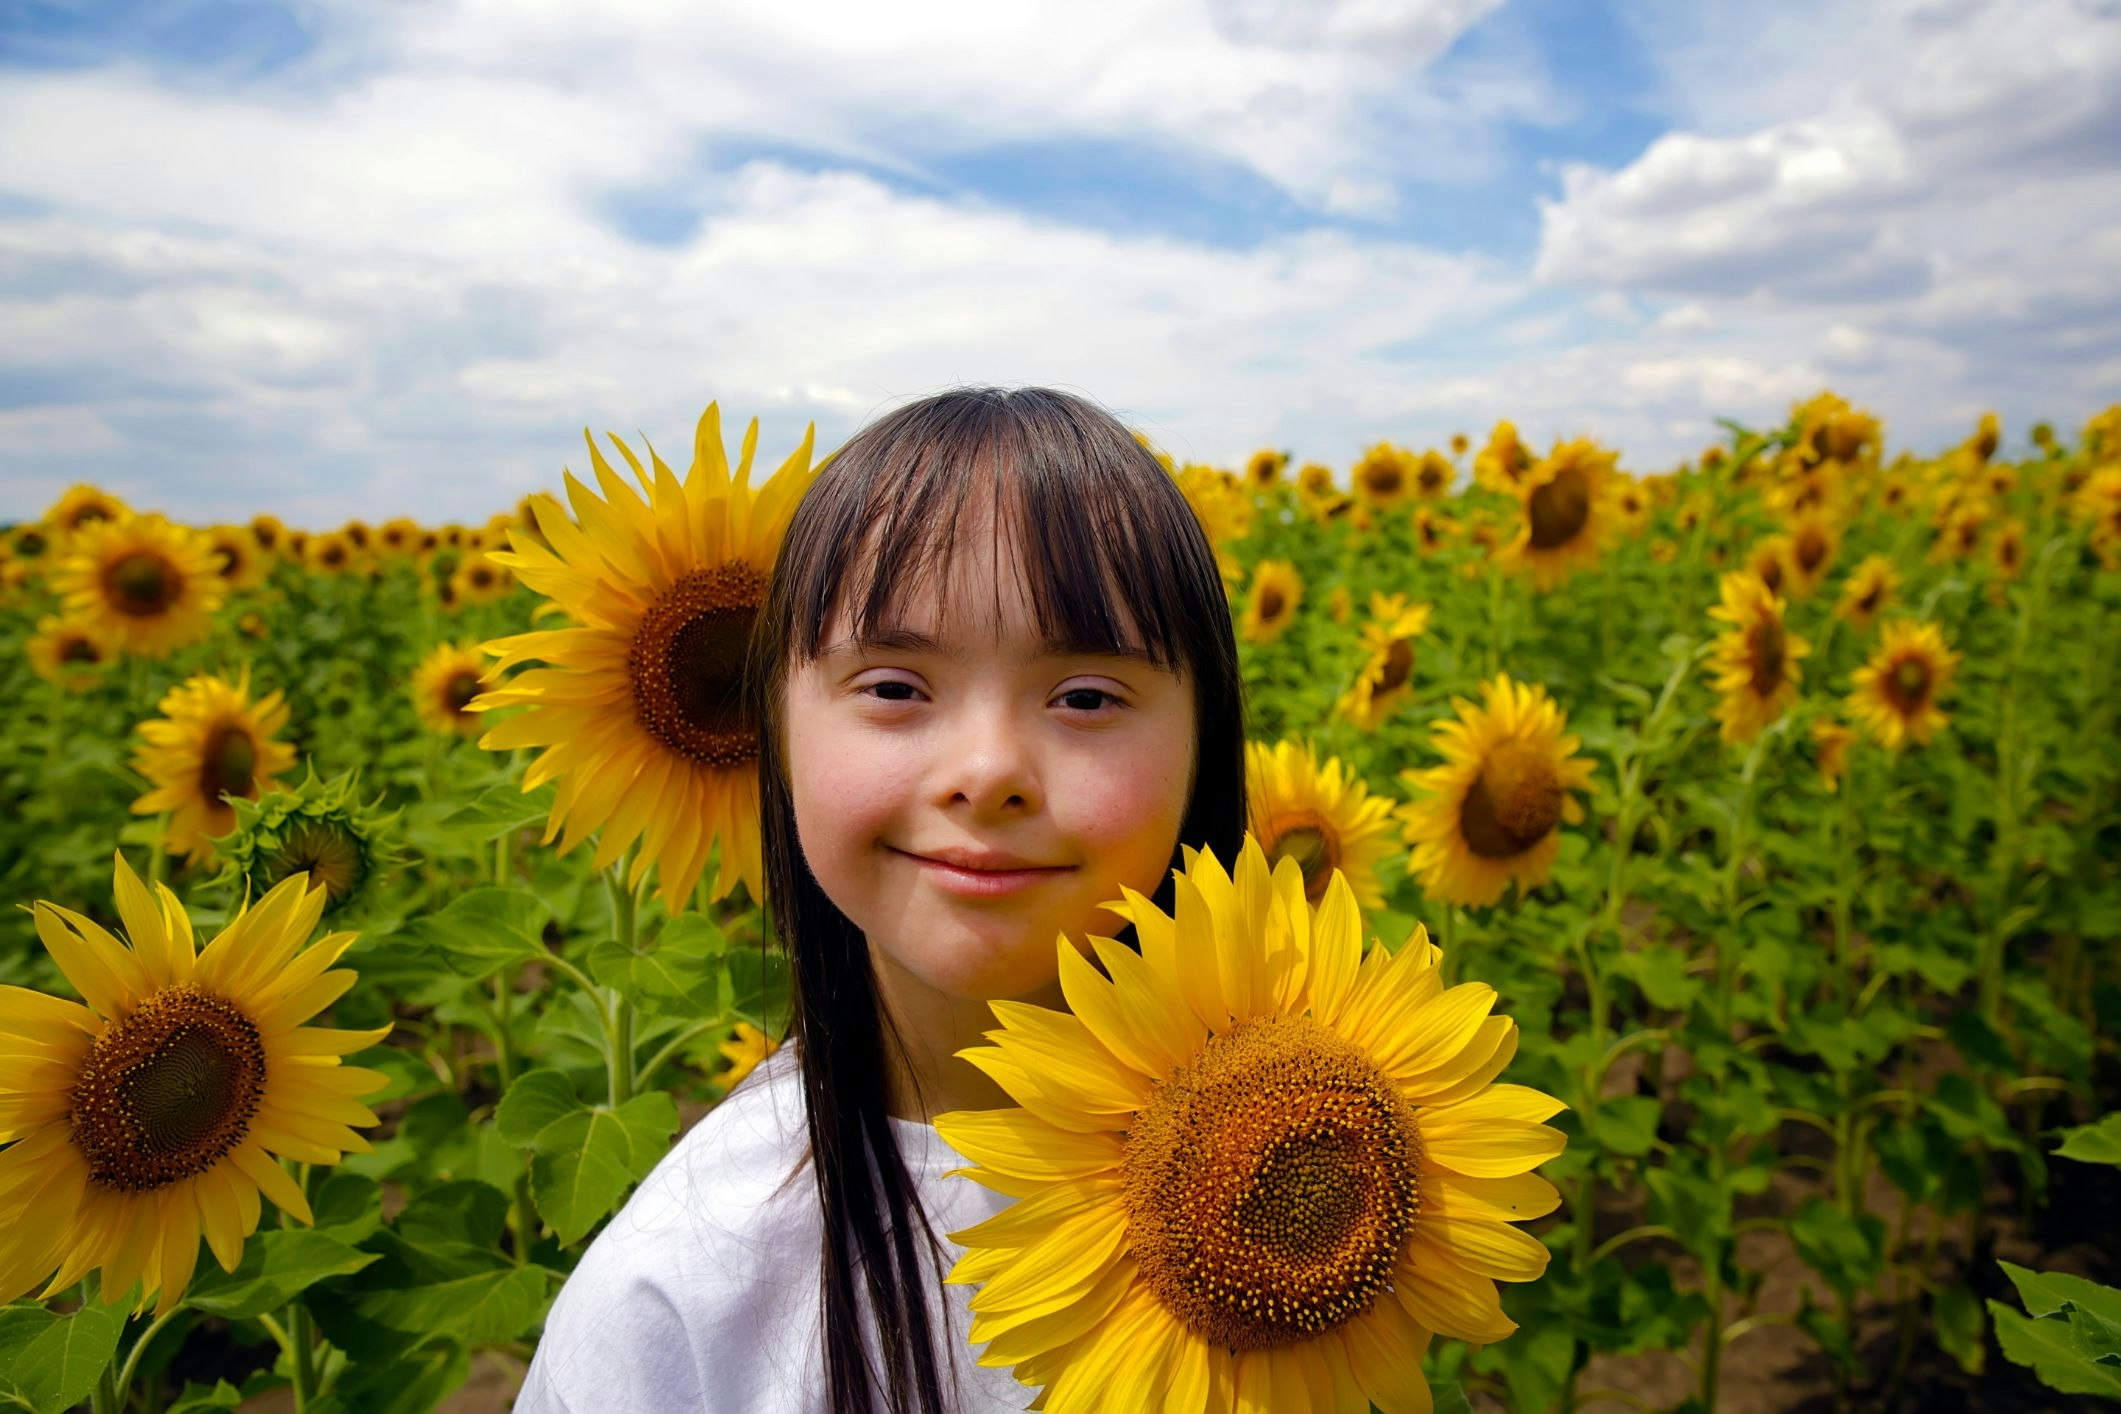 <p>Not all events are disability-friendly, but the Kalbar Sunflower Festival is hoping to increase inclusivity in their outdoor event. [Source: Shutterstock]</p>
